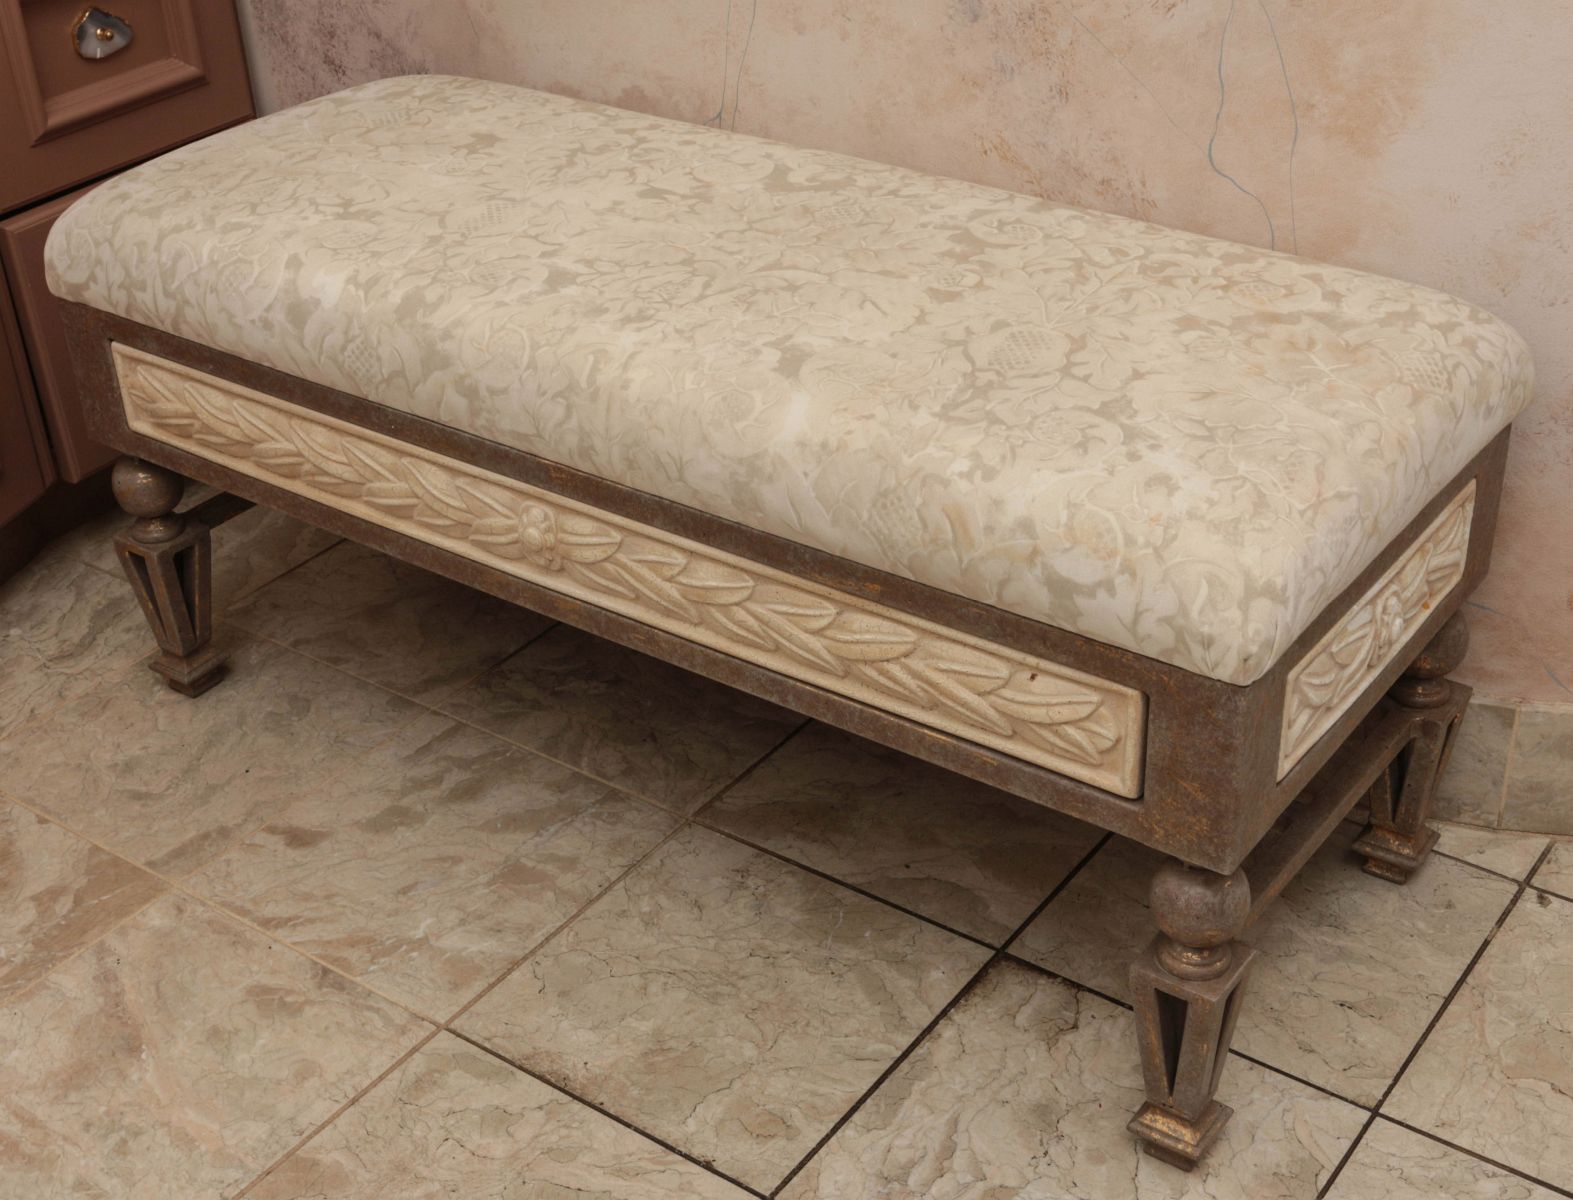 AN IRON BASE DRESSING ROOM BENCH WITH PADDED SEAT